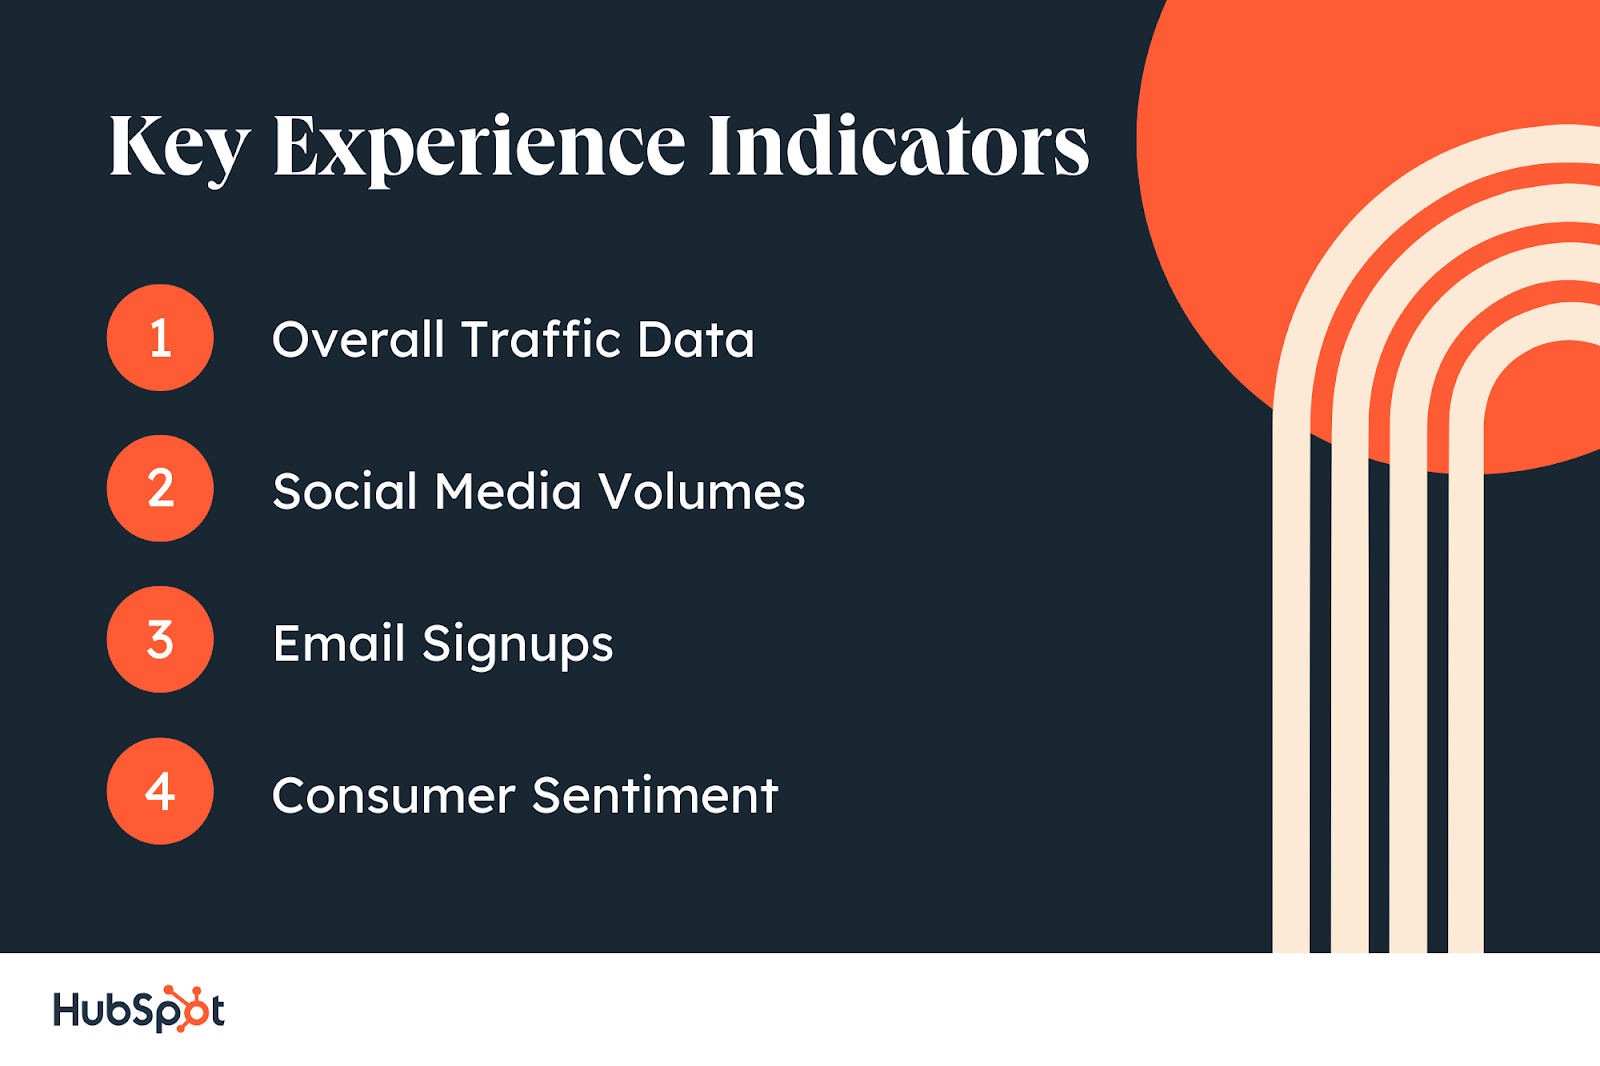 Key Experience Indicators. Overall Traffic Data. Social Media Volumes. Email Signups. Consumer Sentiment.